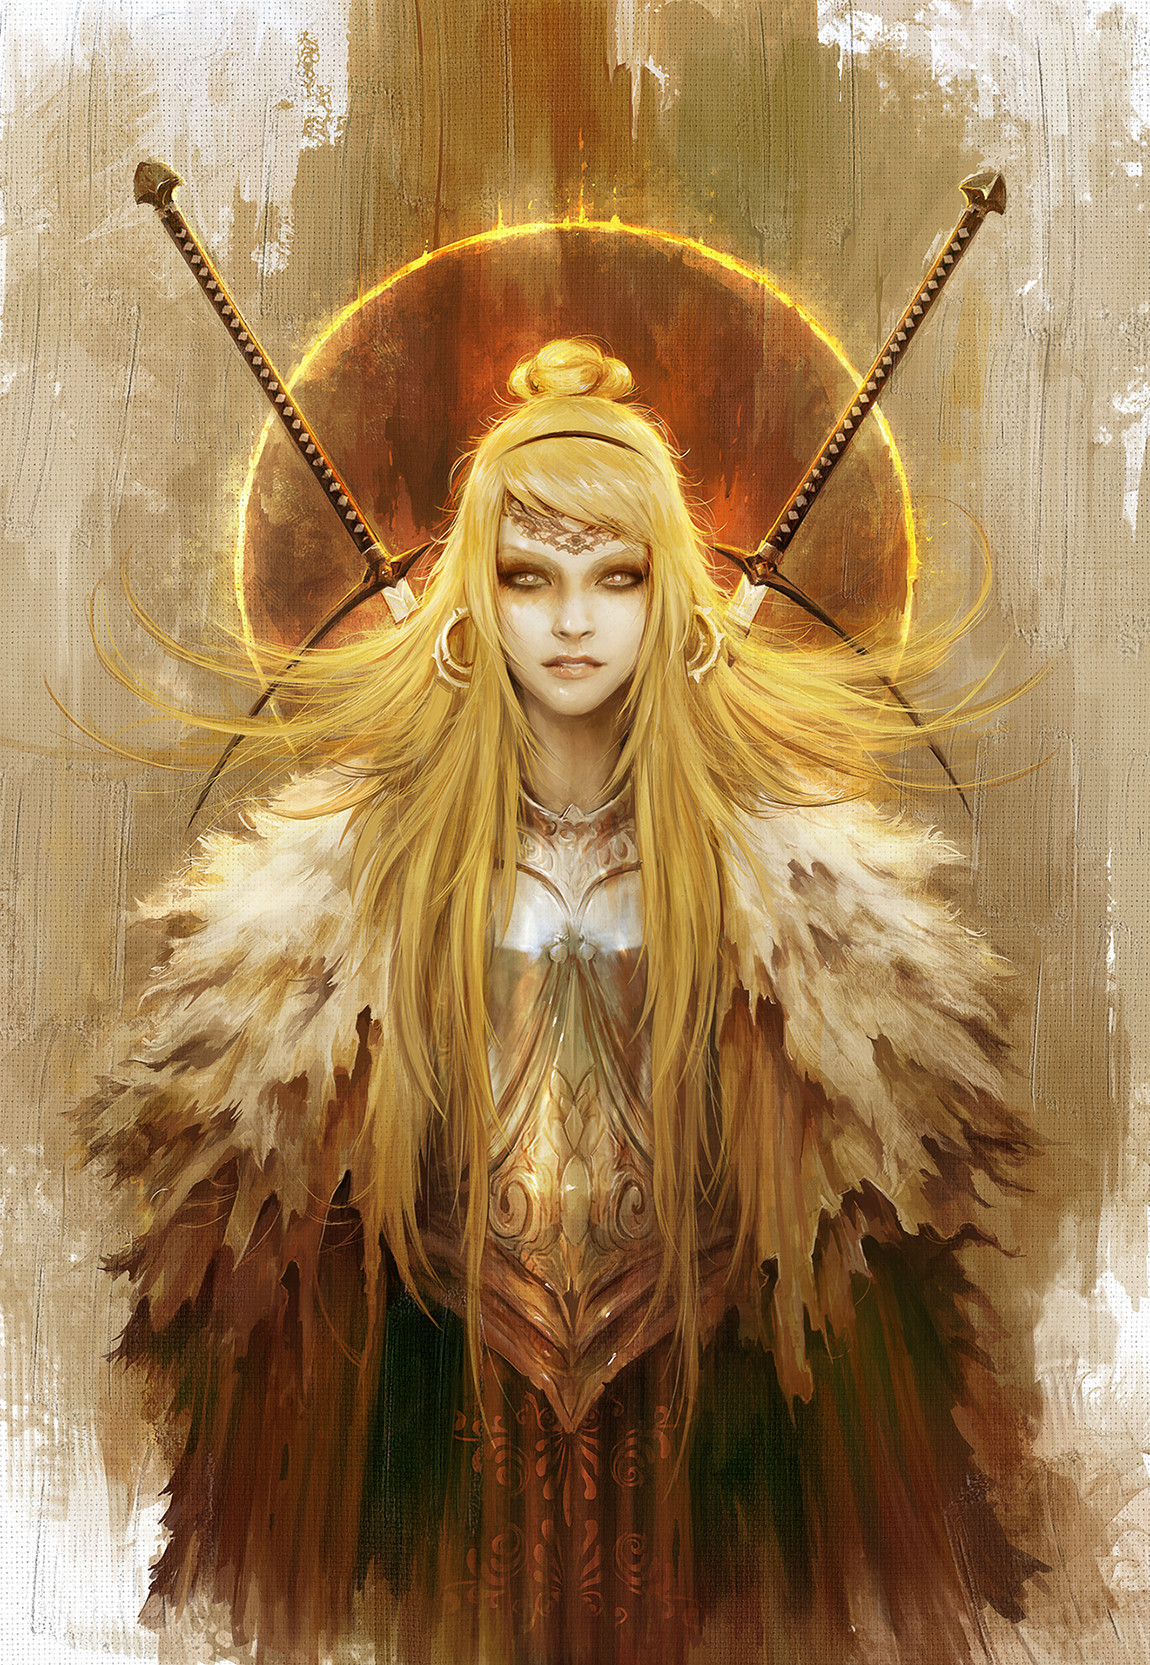 General 1150x1665 Alexandre Chaudret women armor clothes sword long hair tie yellow painting moonlight